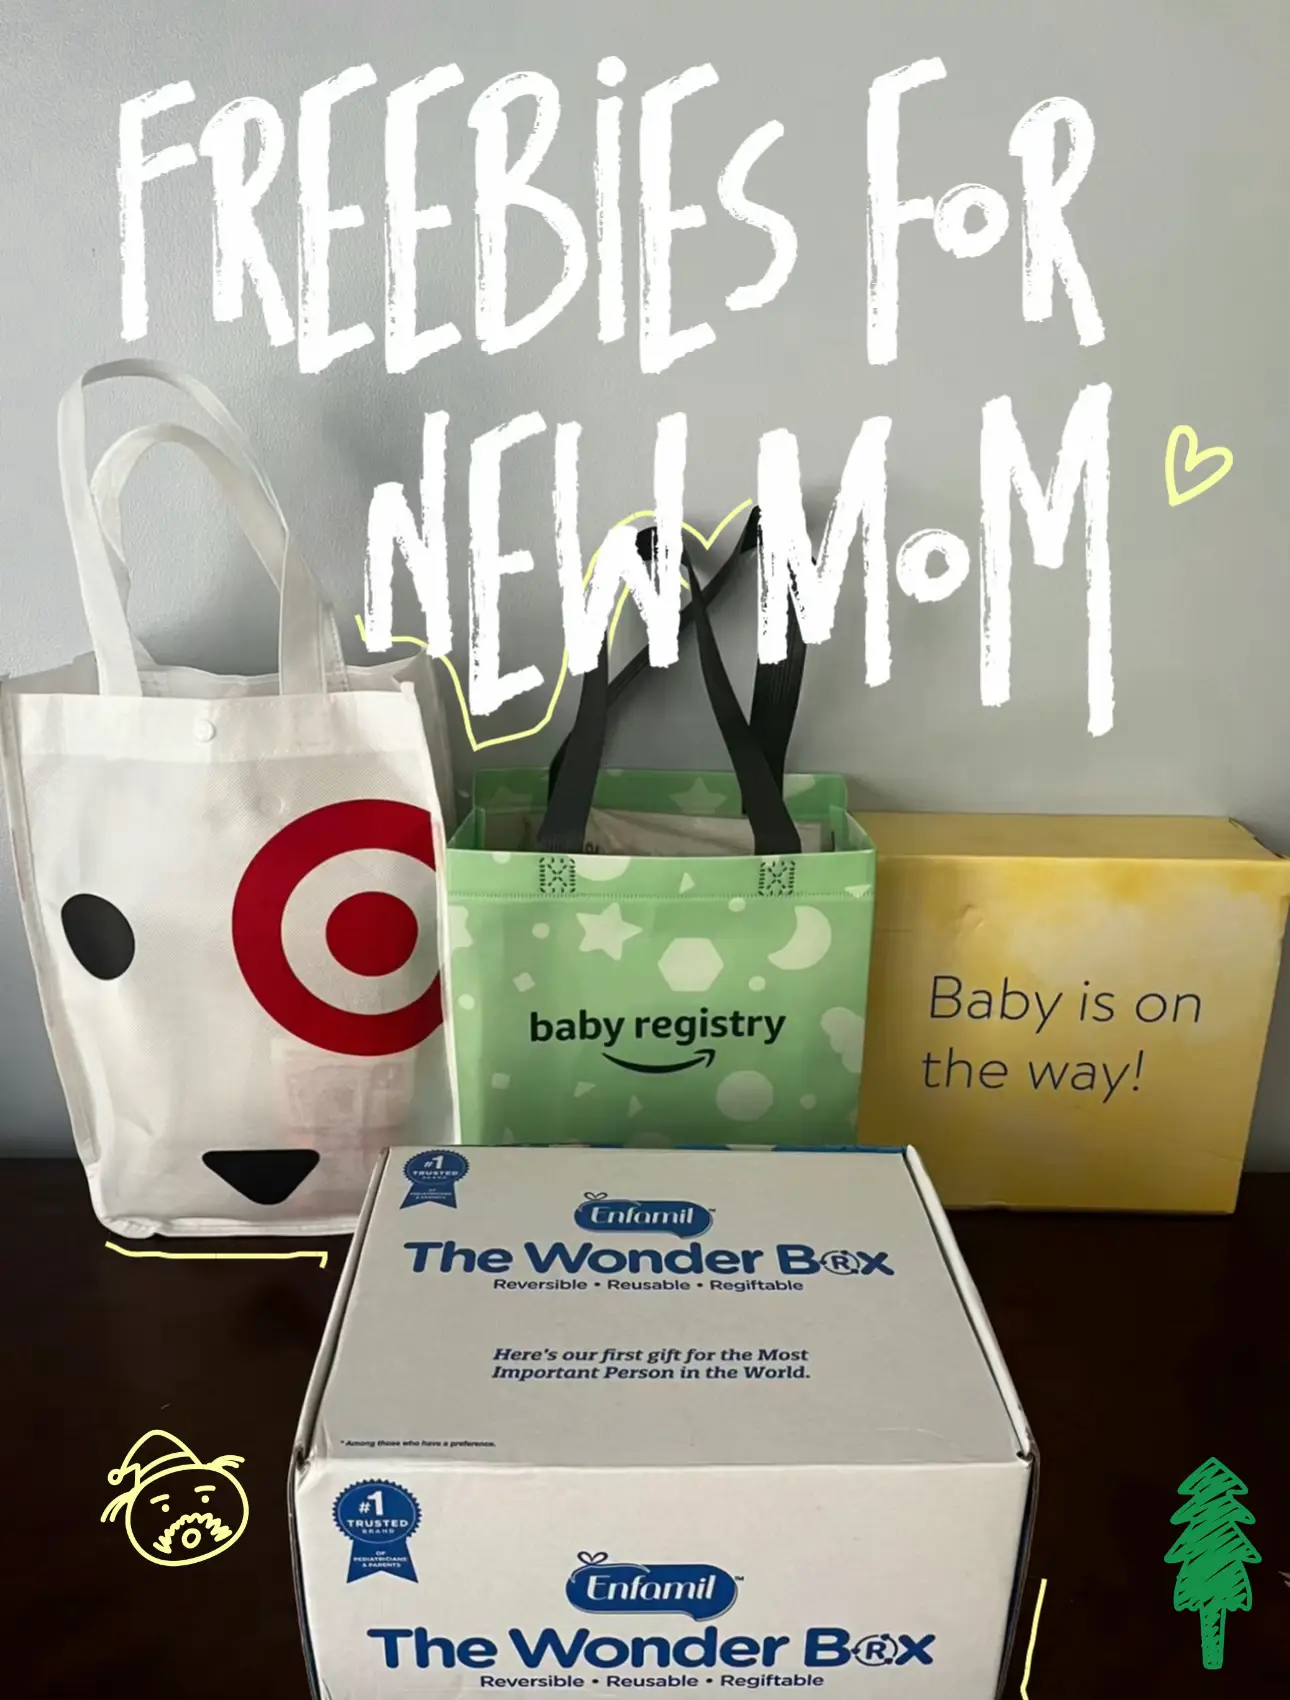 Newmom - 🎉 Introducing Newmom Disposable Underpads for Kids